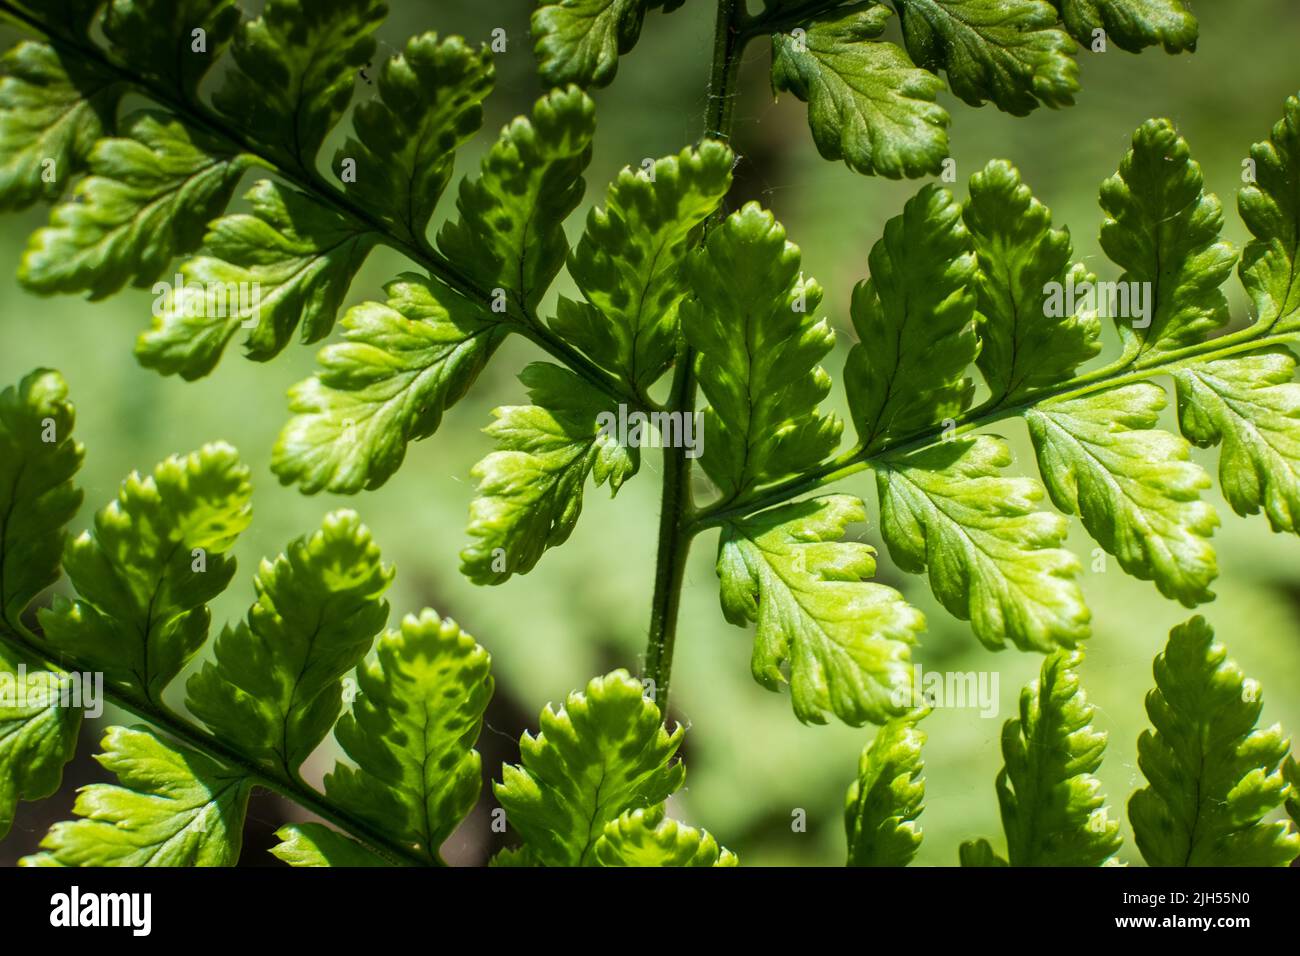 Beautyful ferns leaves, green foliage, natural floral fern background in sunlight. Natural green fern in the forest close up. High quality photo Stock Photo